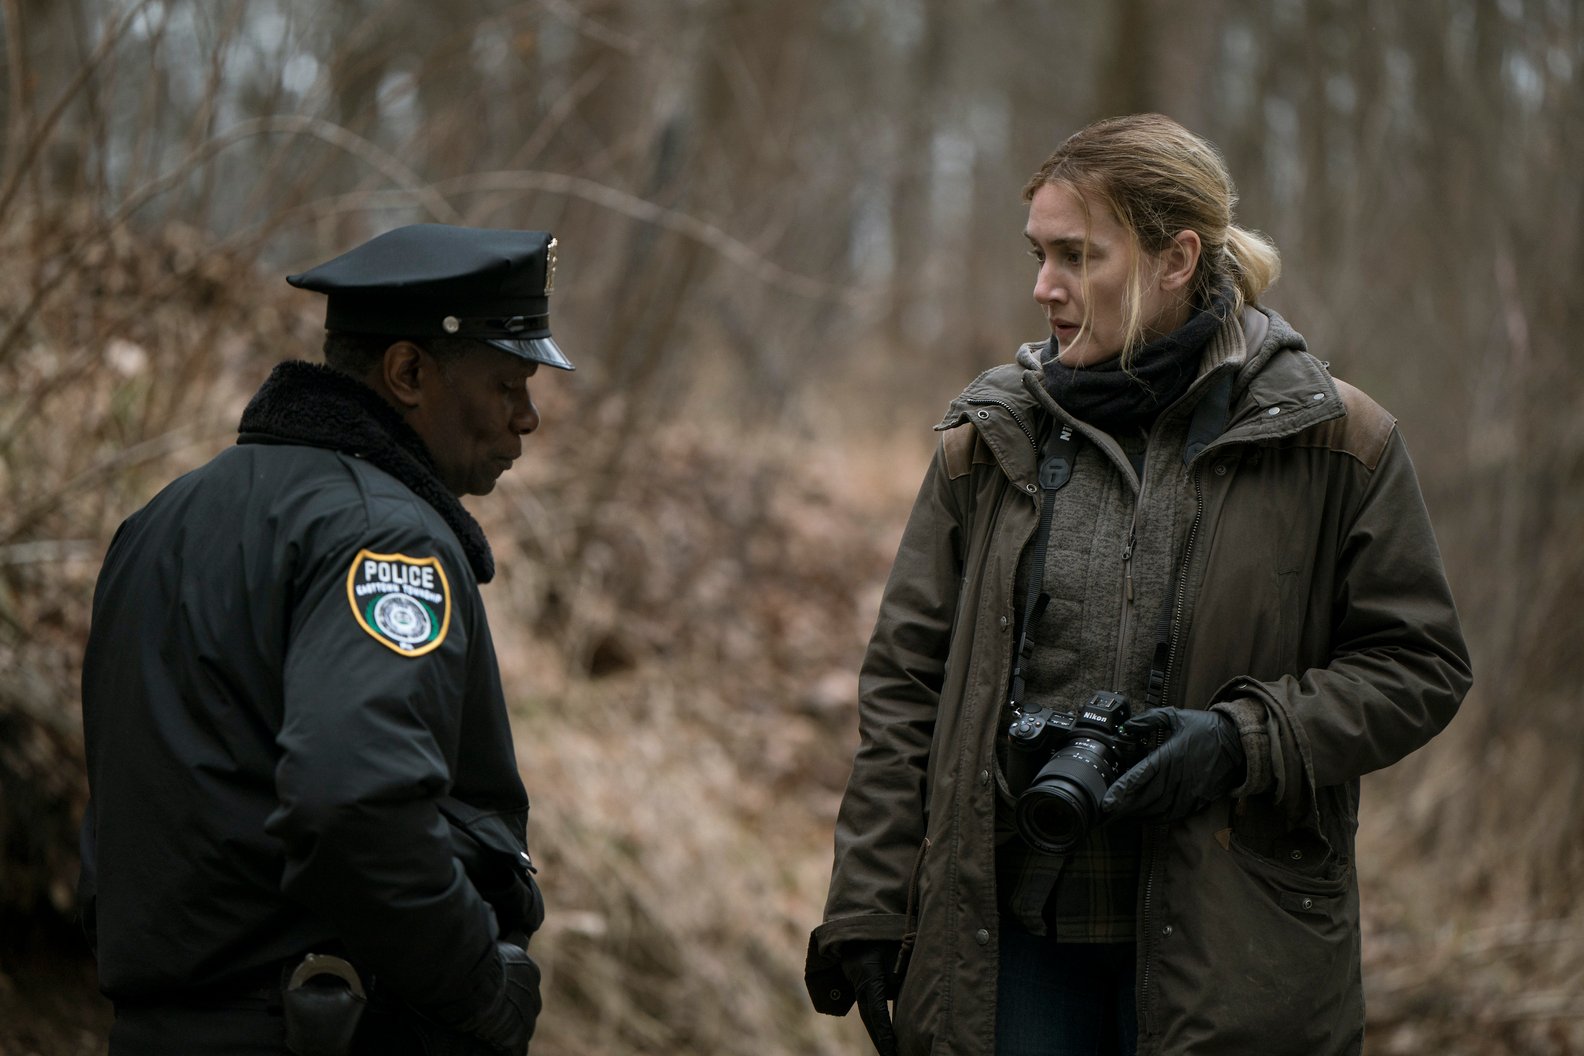 Kate Winslet plays small-town detective Mare who is talking to John Douglas Carter who plays Chief Carter as they investigate a murder in the woods on a dreary day in Easttown.